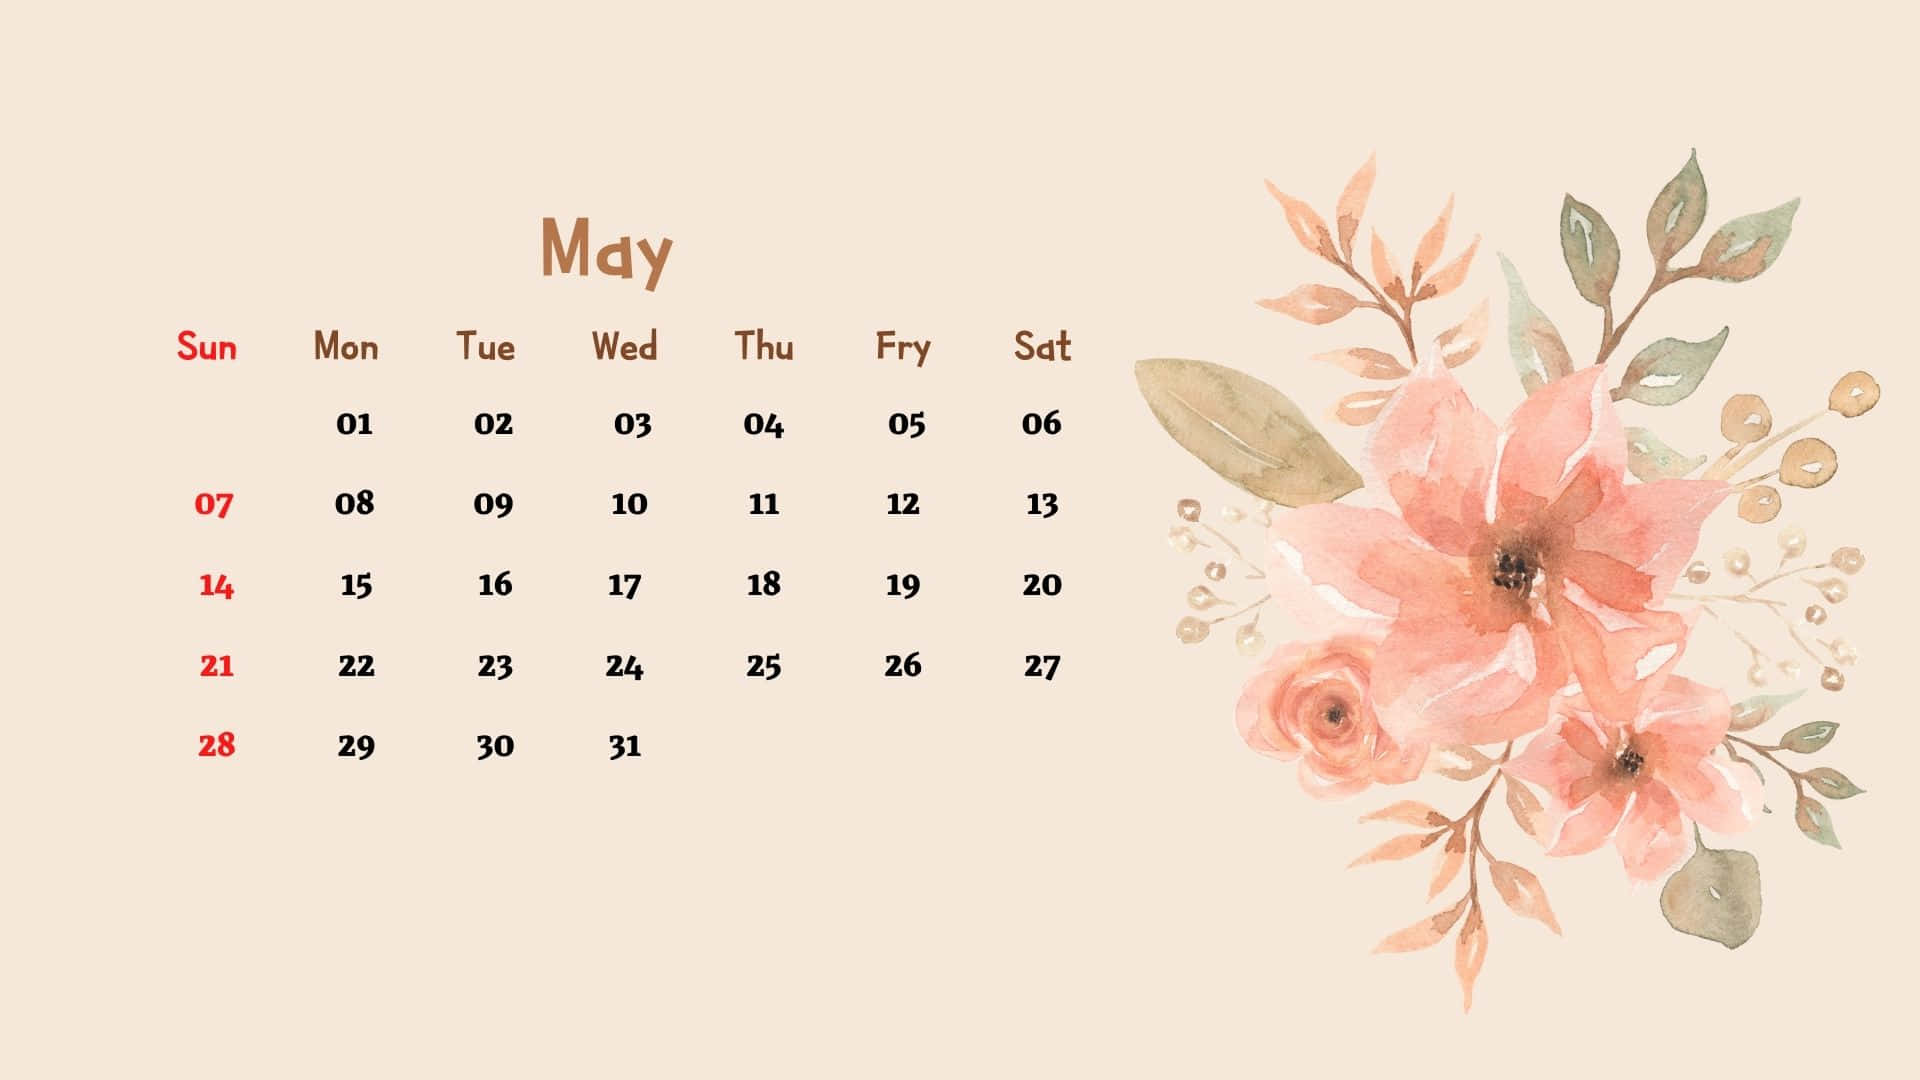 "Schedule Out Your May 2023 Plans with This Calendar" Wallpaper